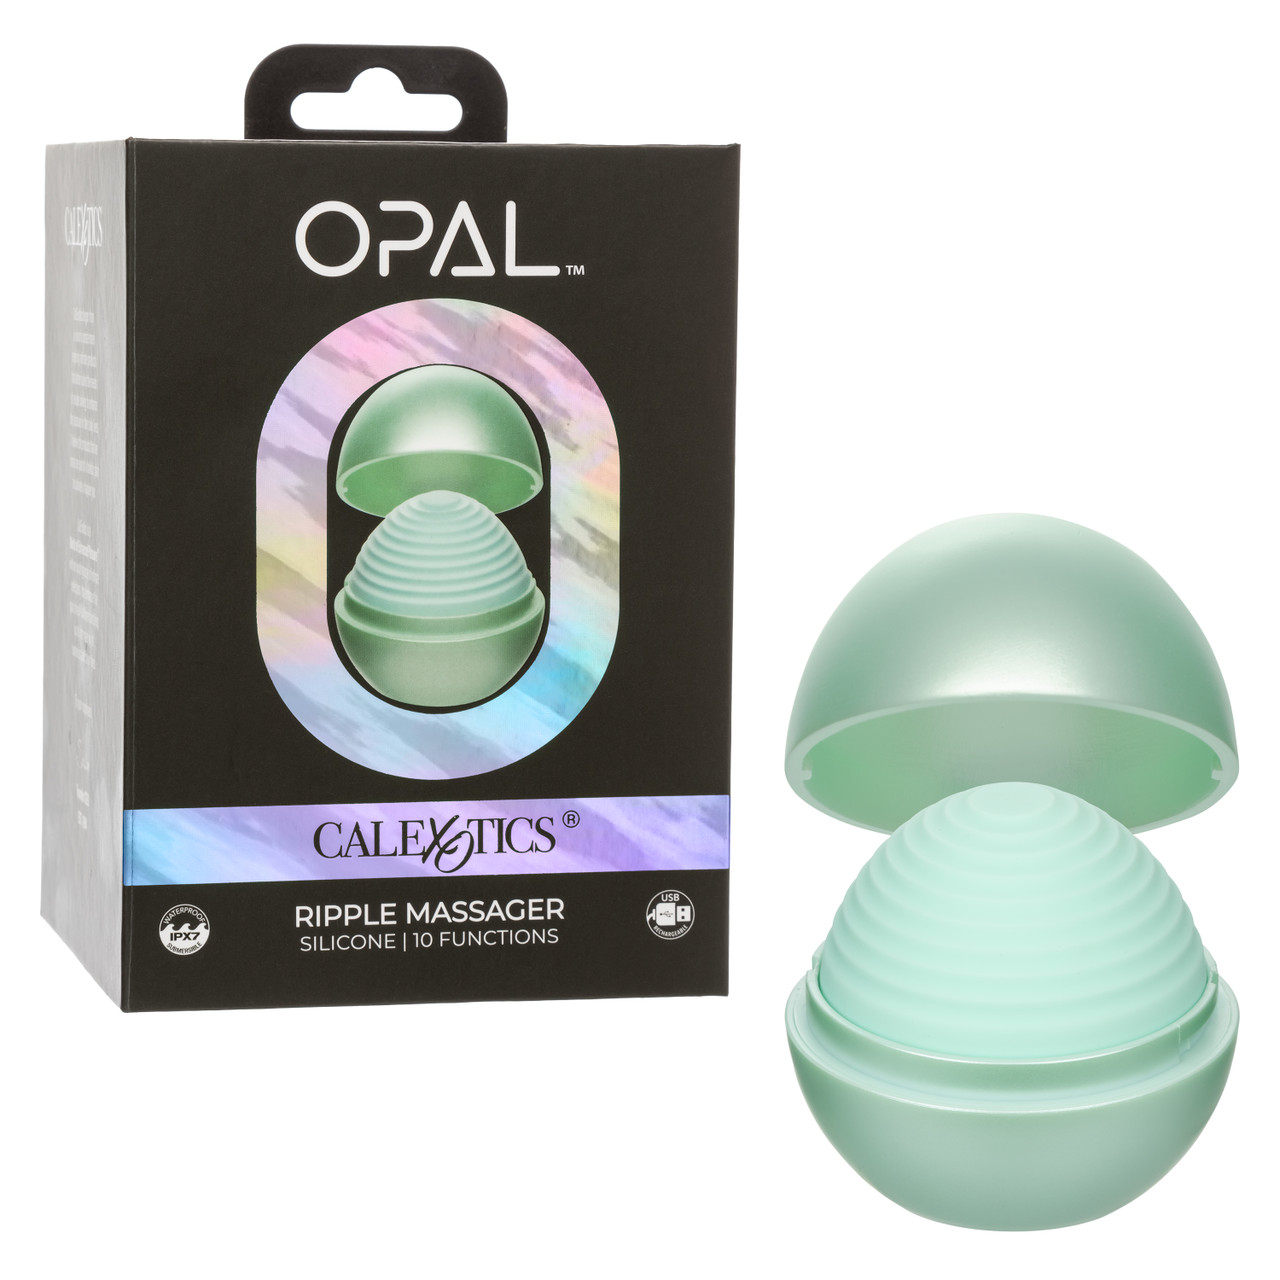 OPAL RIPPLE MASSAGER - Click Image to Close